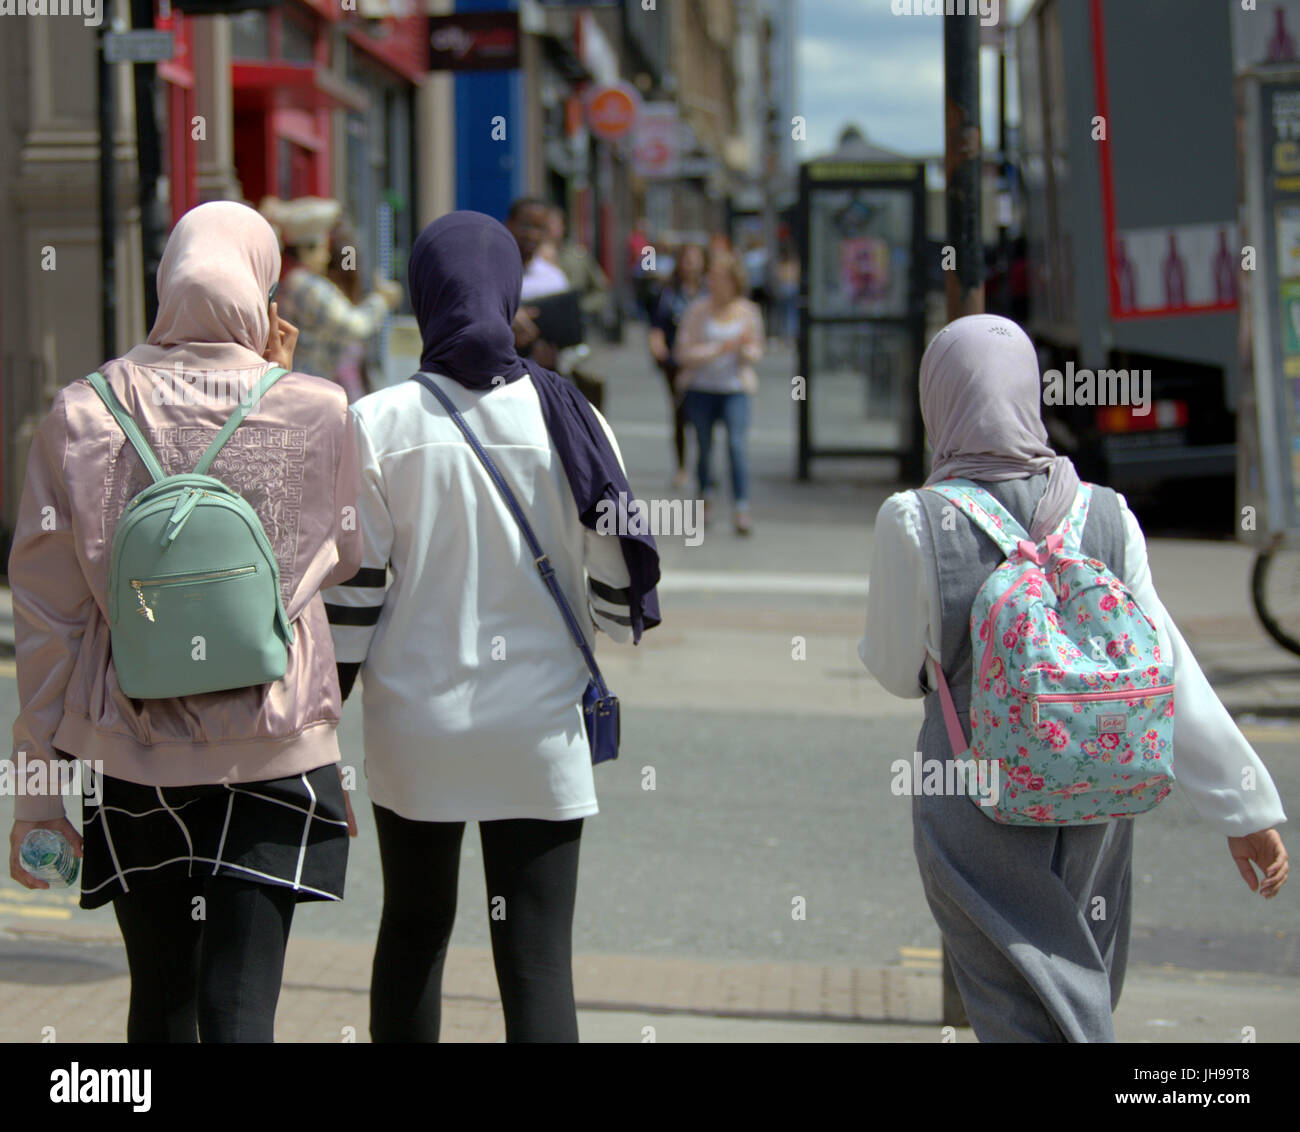 Asian family refugee young woman girl student pupil dressed Hijab scarf on street in the UK everyday scene walking on street Stock Photo